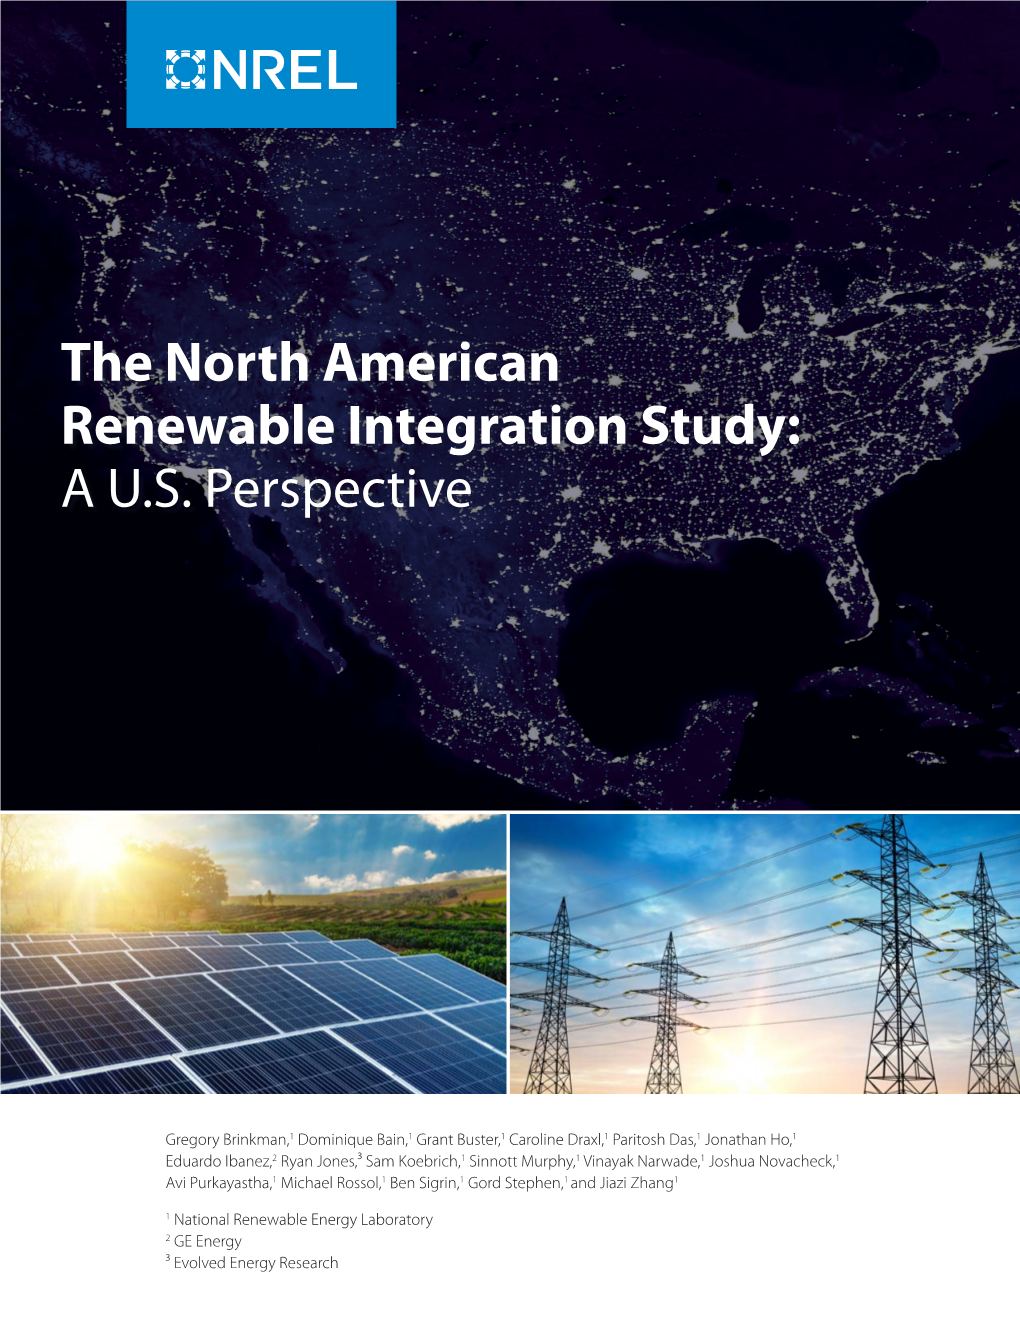 The North American Renewable Integration Study (NARIS): a U.S. Perspective